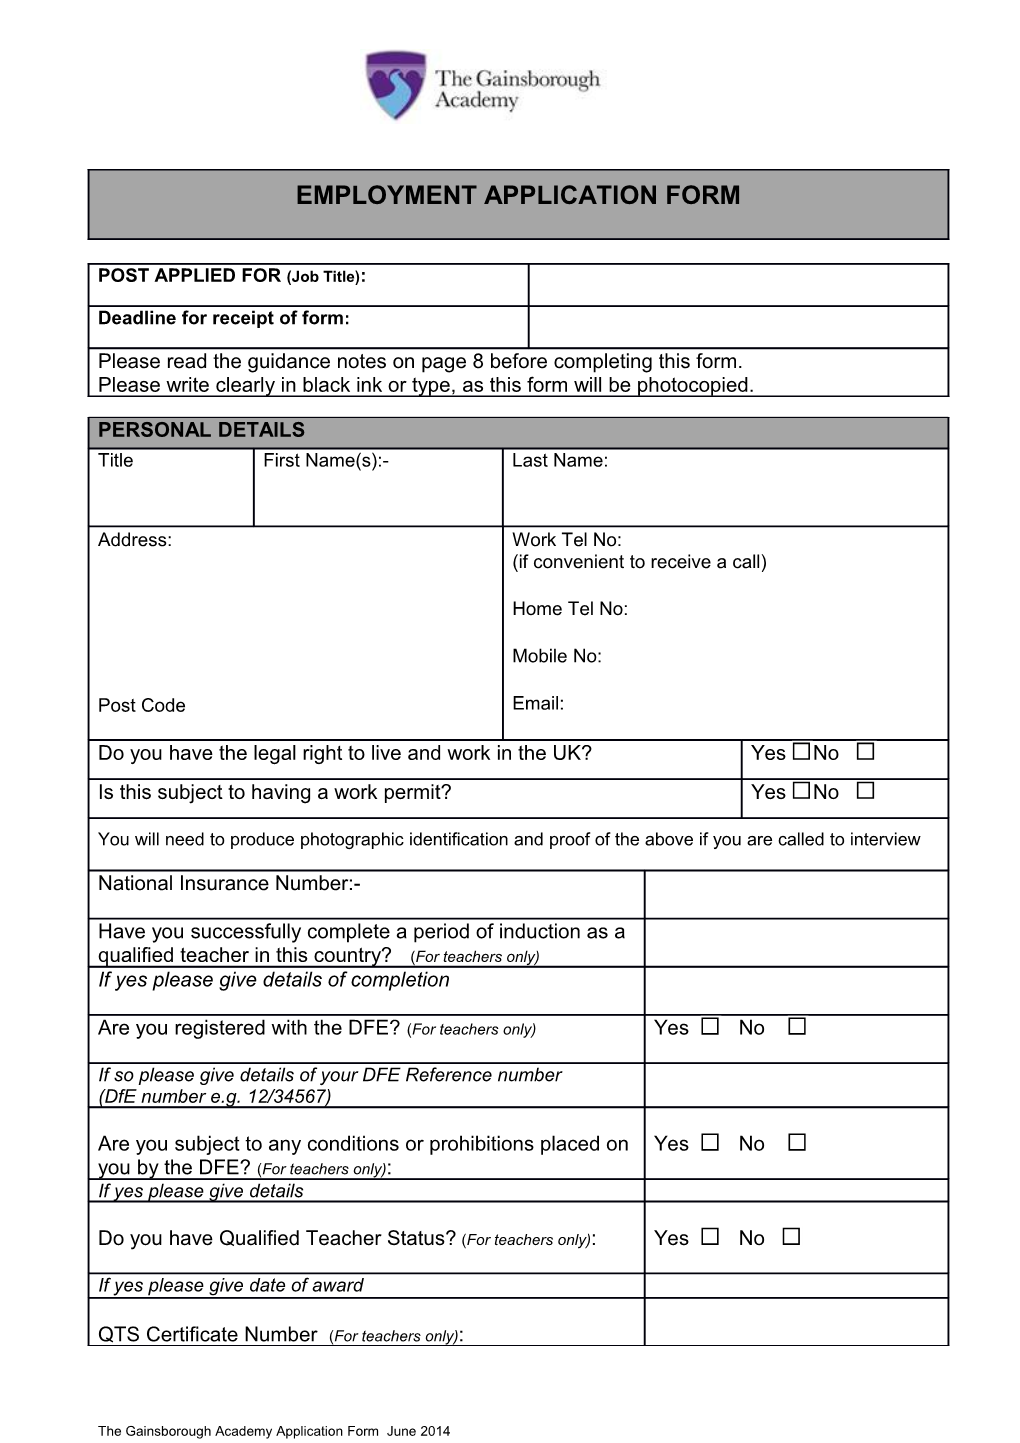 The Gainsborough Academy Application Form June 2014 Page 5